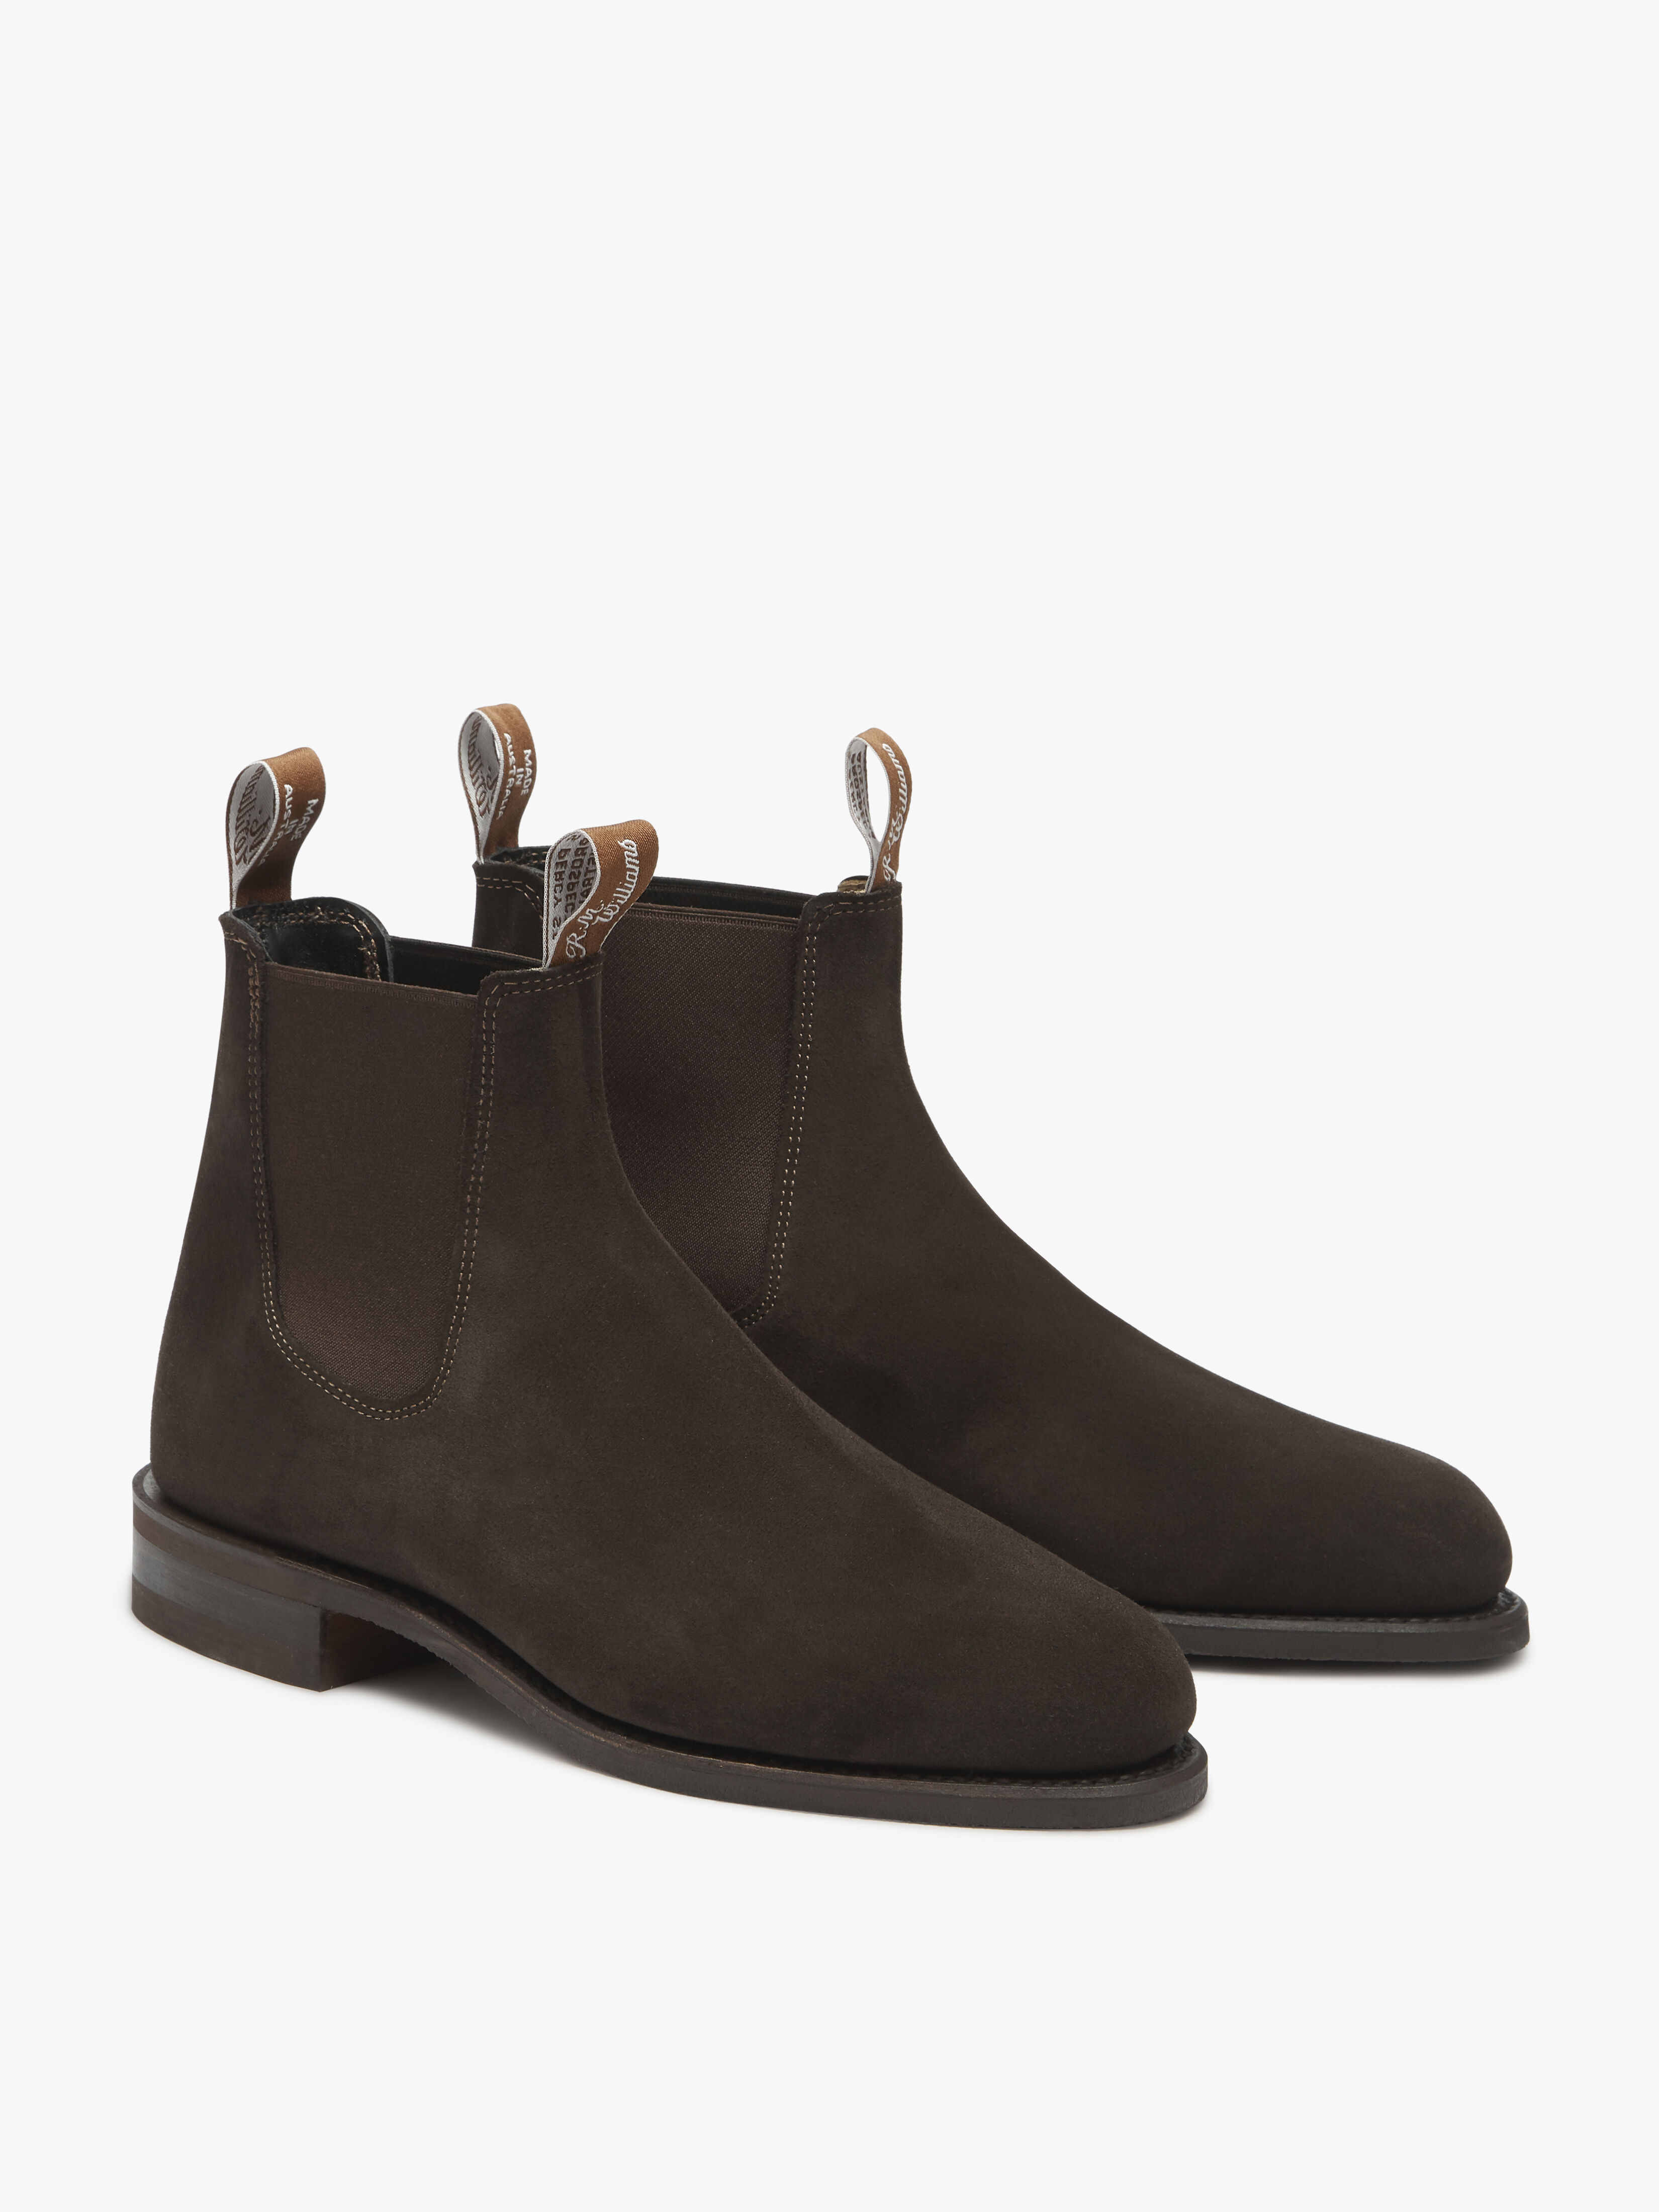 rm williams comfort turnout boots